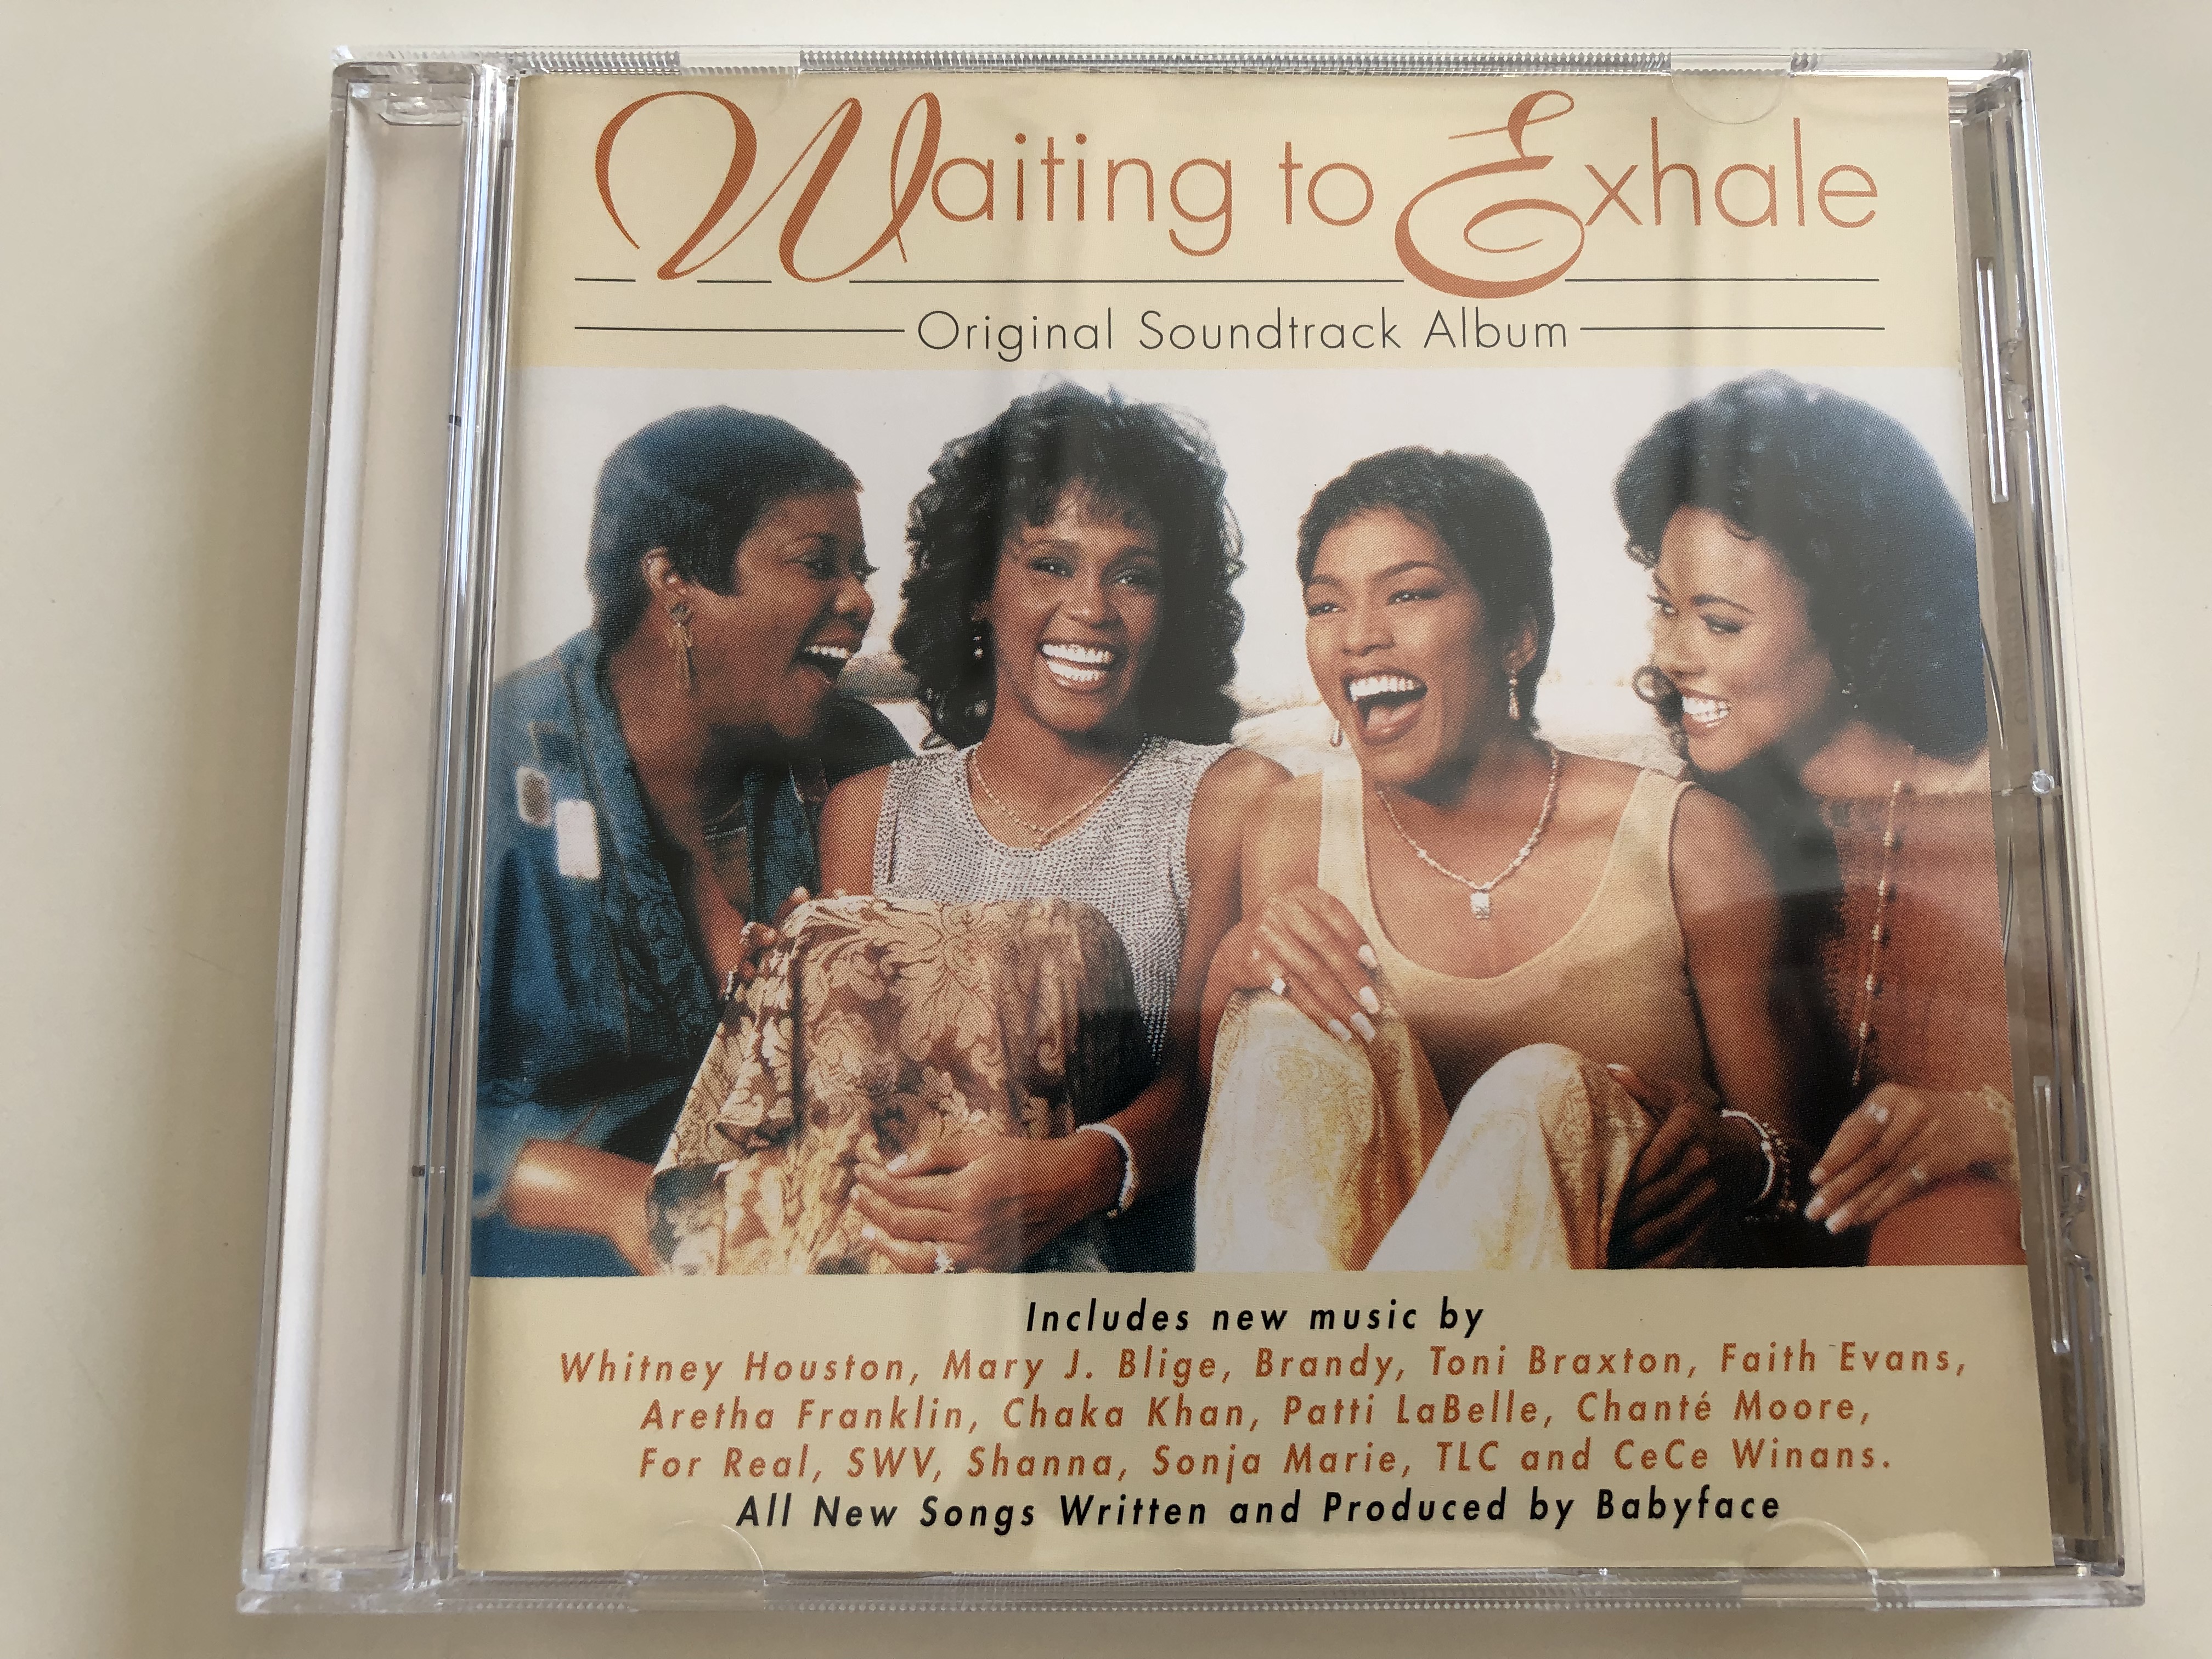 waiting-to-exhale-original-soundtrack-album-includes-new-music-by-whitney-houston-mary-j.-blige-toni-braxton-aretha-franklin-audio-cd-1995-arista-records-1-.jpg